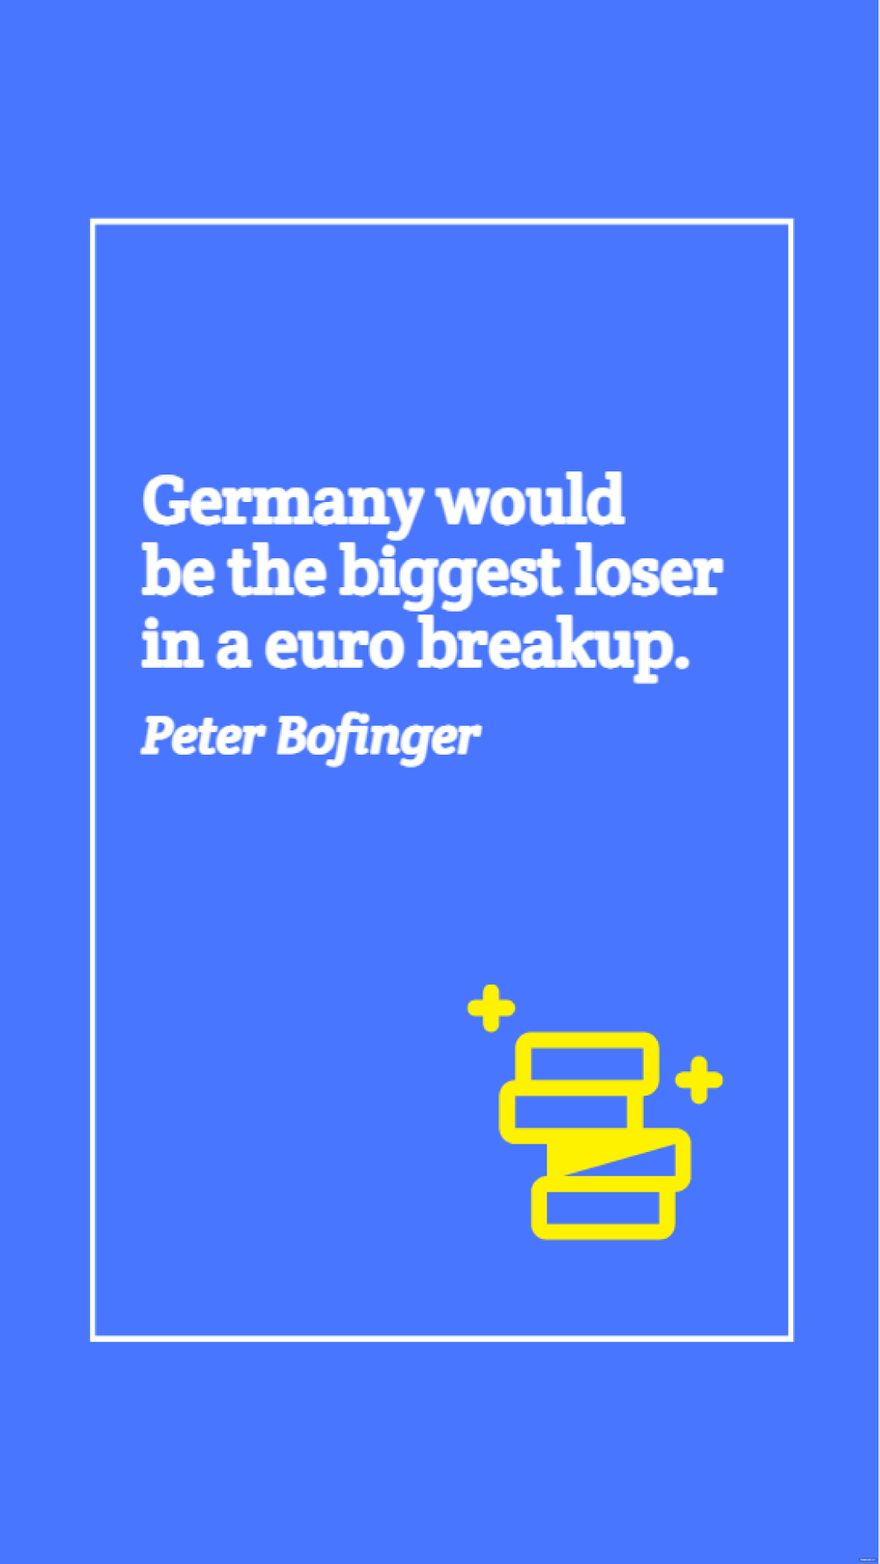 Free Peter Bofinger - Germany would be the biggest loser in a euro breakup. in JPG